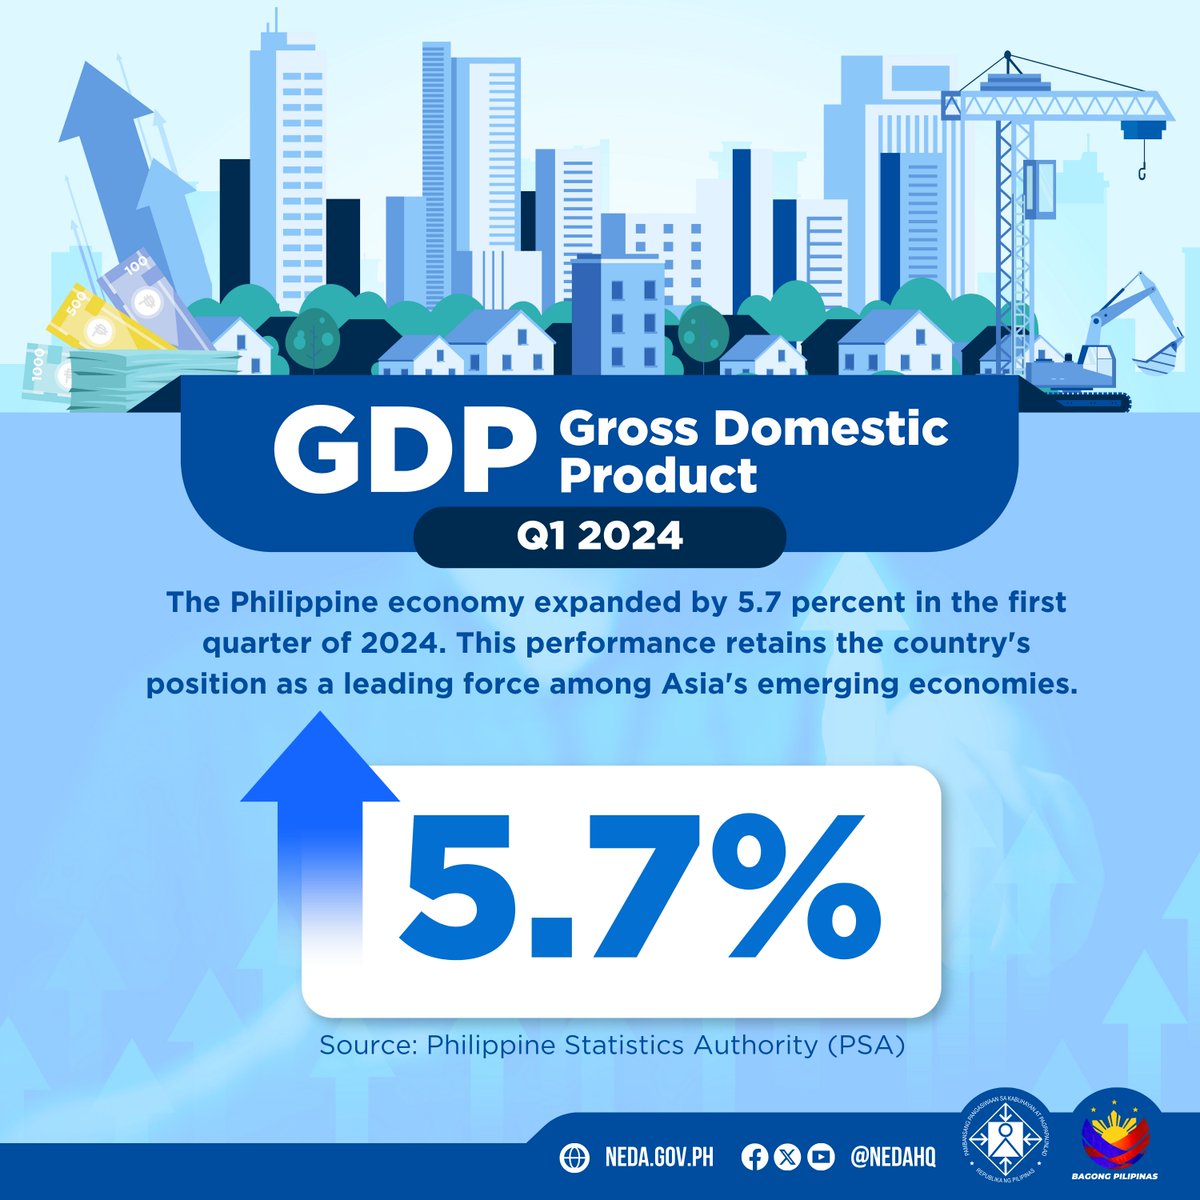 𝐋𝐎𝐎𝐊: The Philippine economy expanded by 5.7% in the first quarter of 2024. This performance retains the country's position as a leading force among Asia's emerging economies. #PHGDP